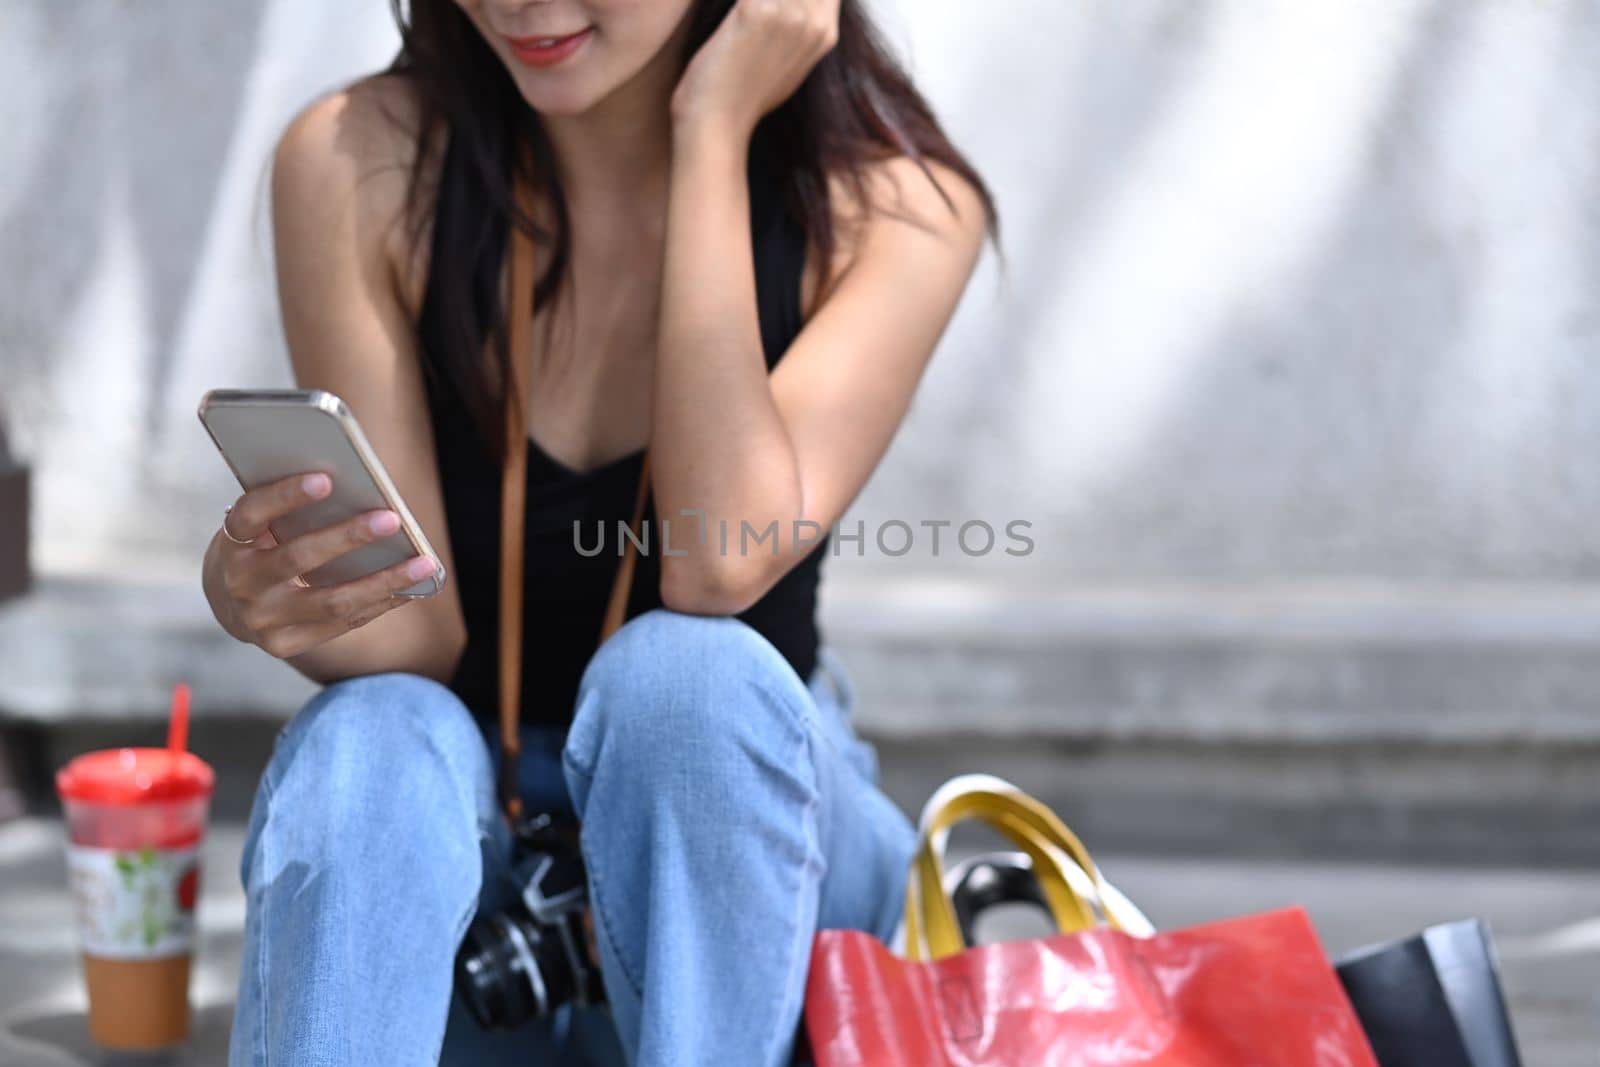 Smiling young woman using smart phone and sitting on stairs with shopping bags. by prathanchorruangsak